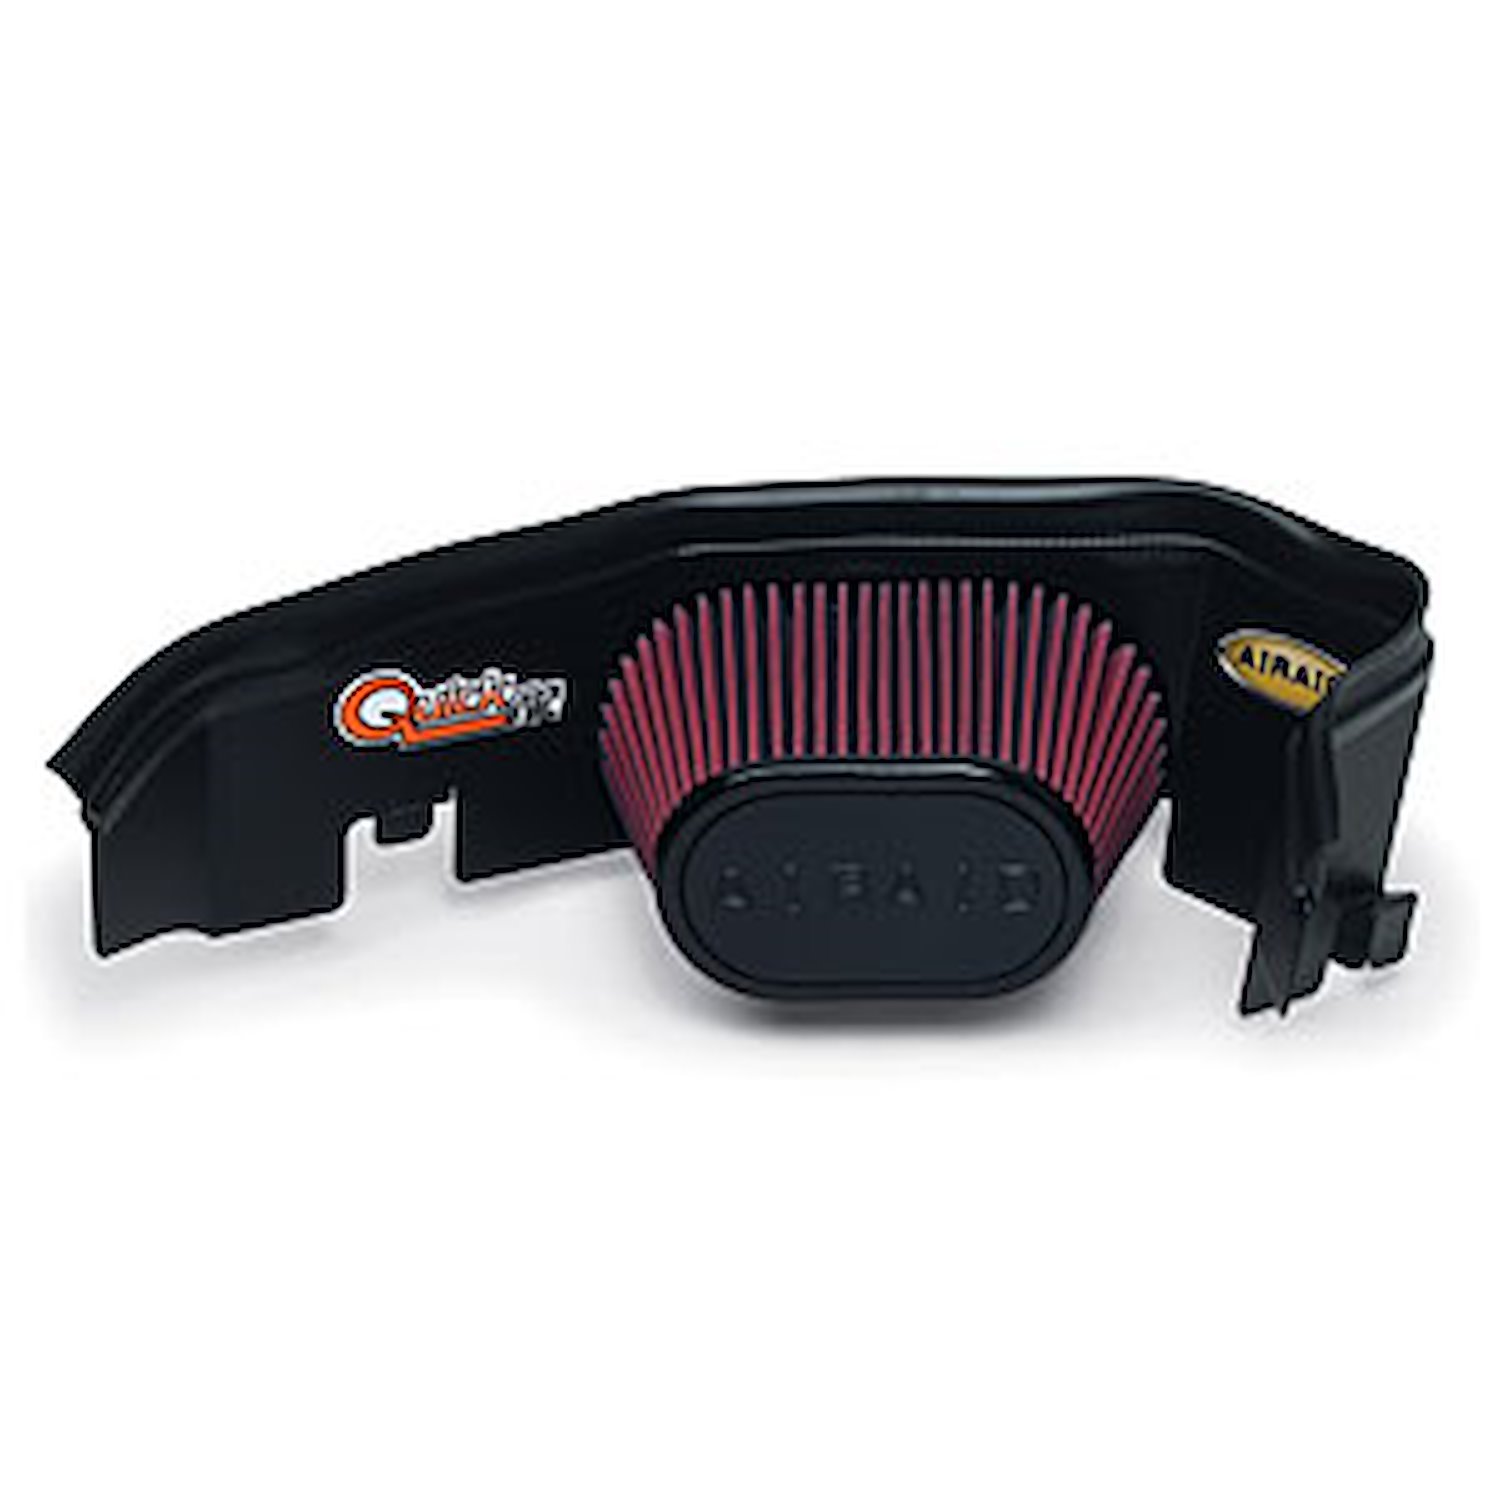 QuickFit Intake System 1999-2004 Jeep Grand Cherokee 4.0 & 4.7L (except H.O.)